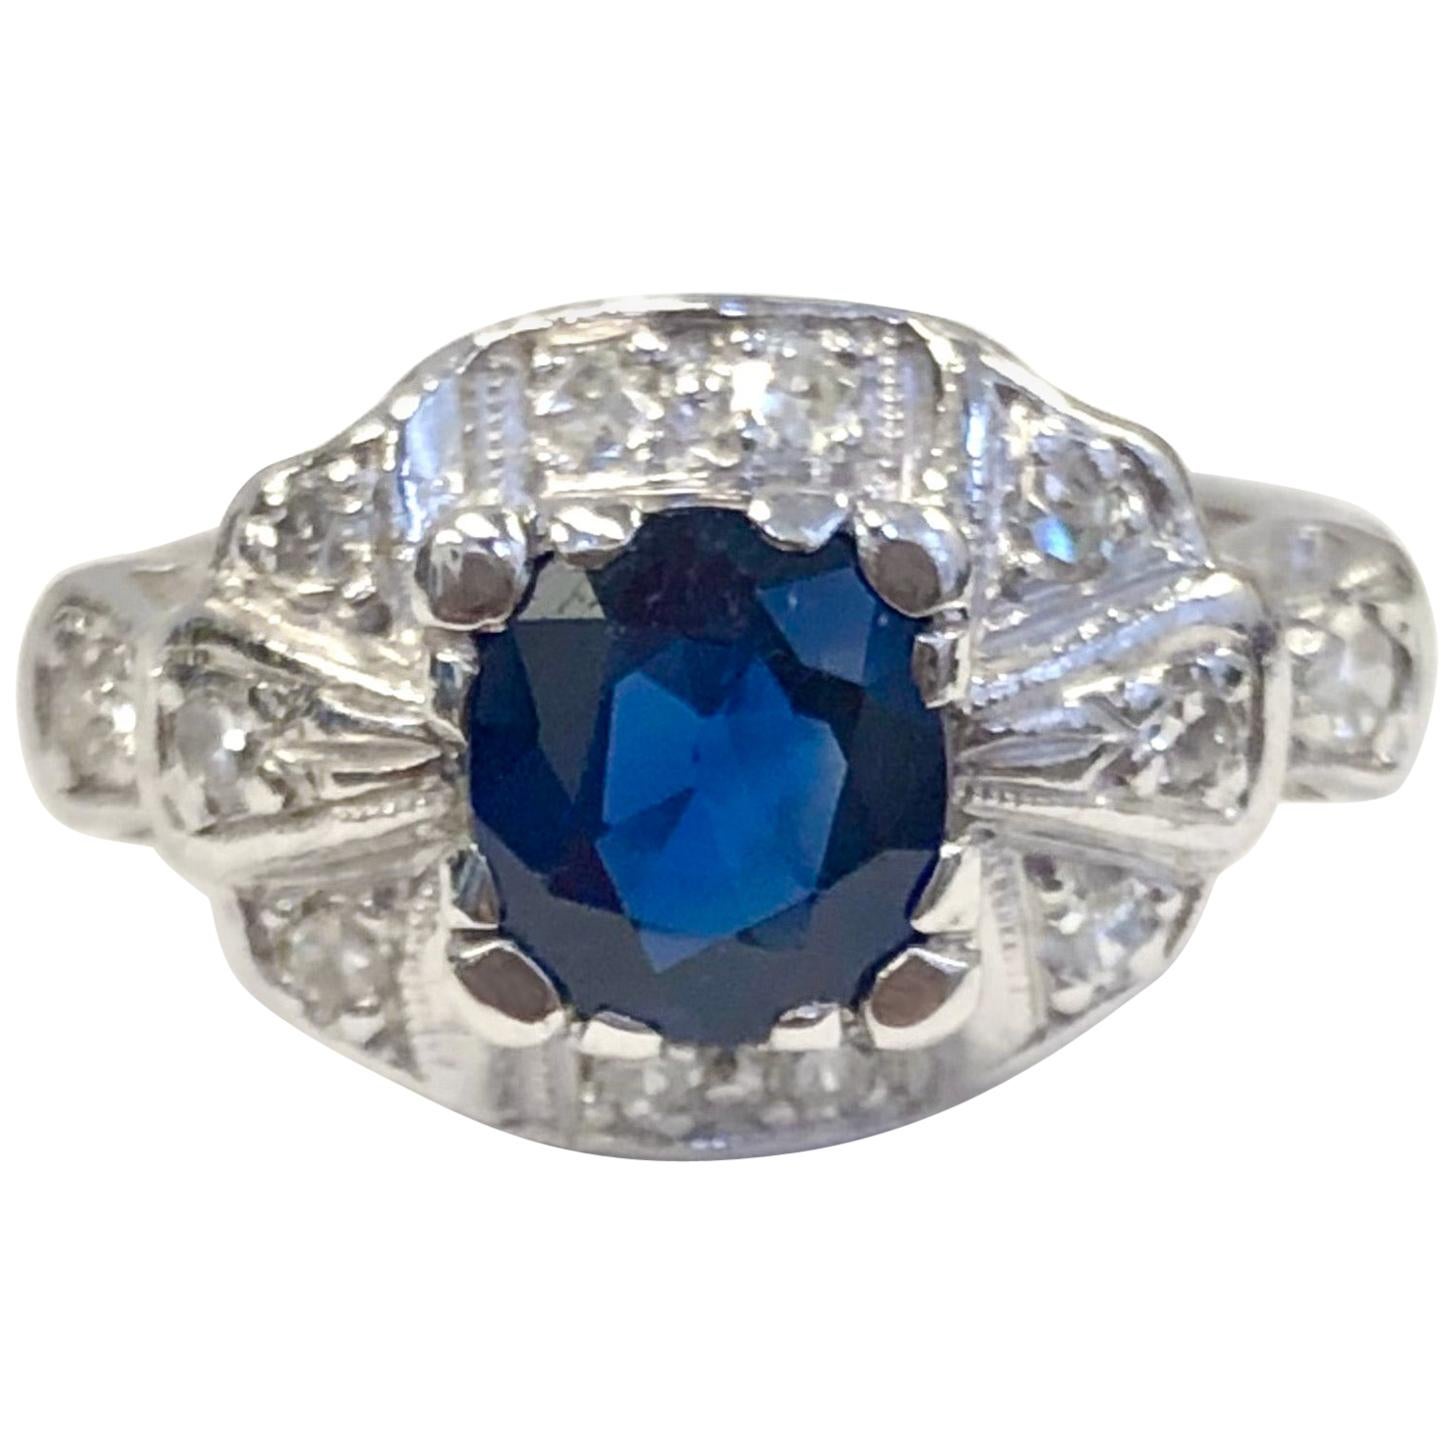 Estate 18 Karat Diamond and 1.30 Carat Burma Sapphire Ring with Finger Fit For Sale